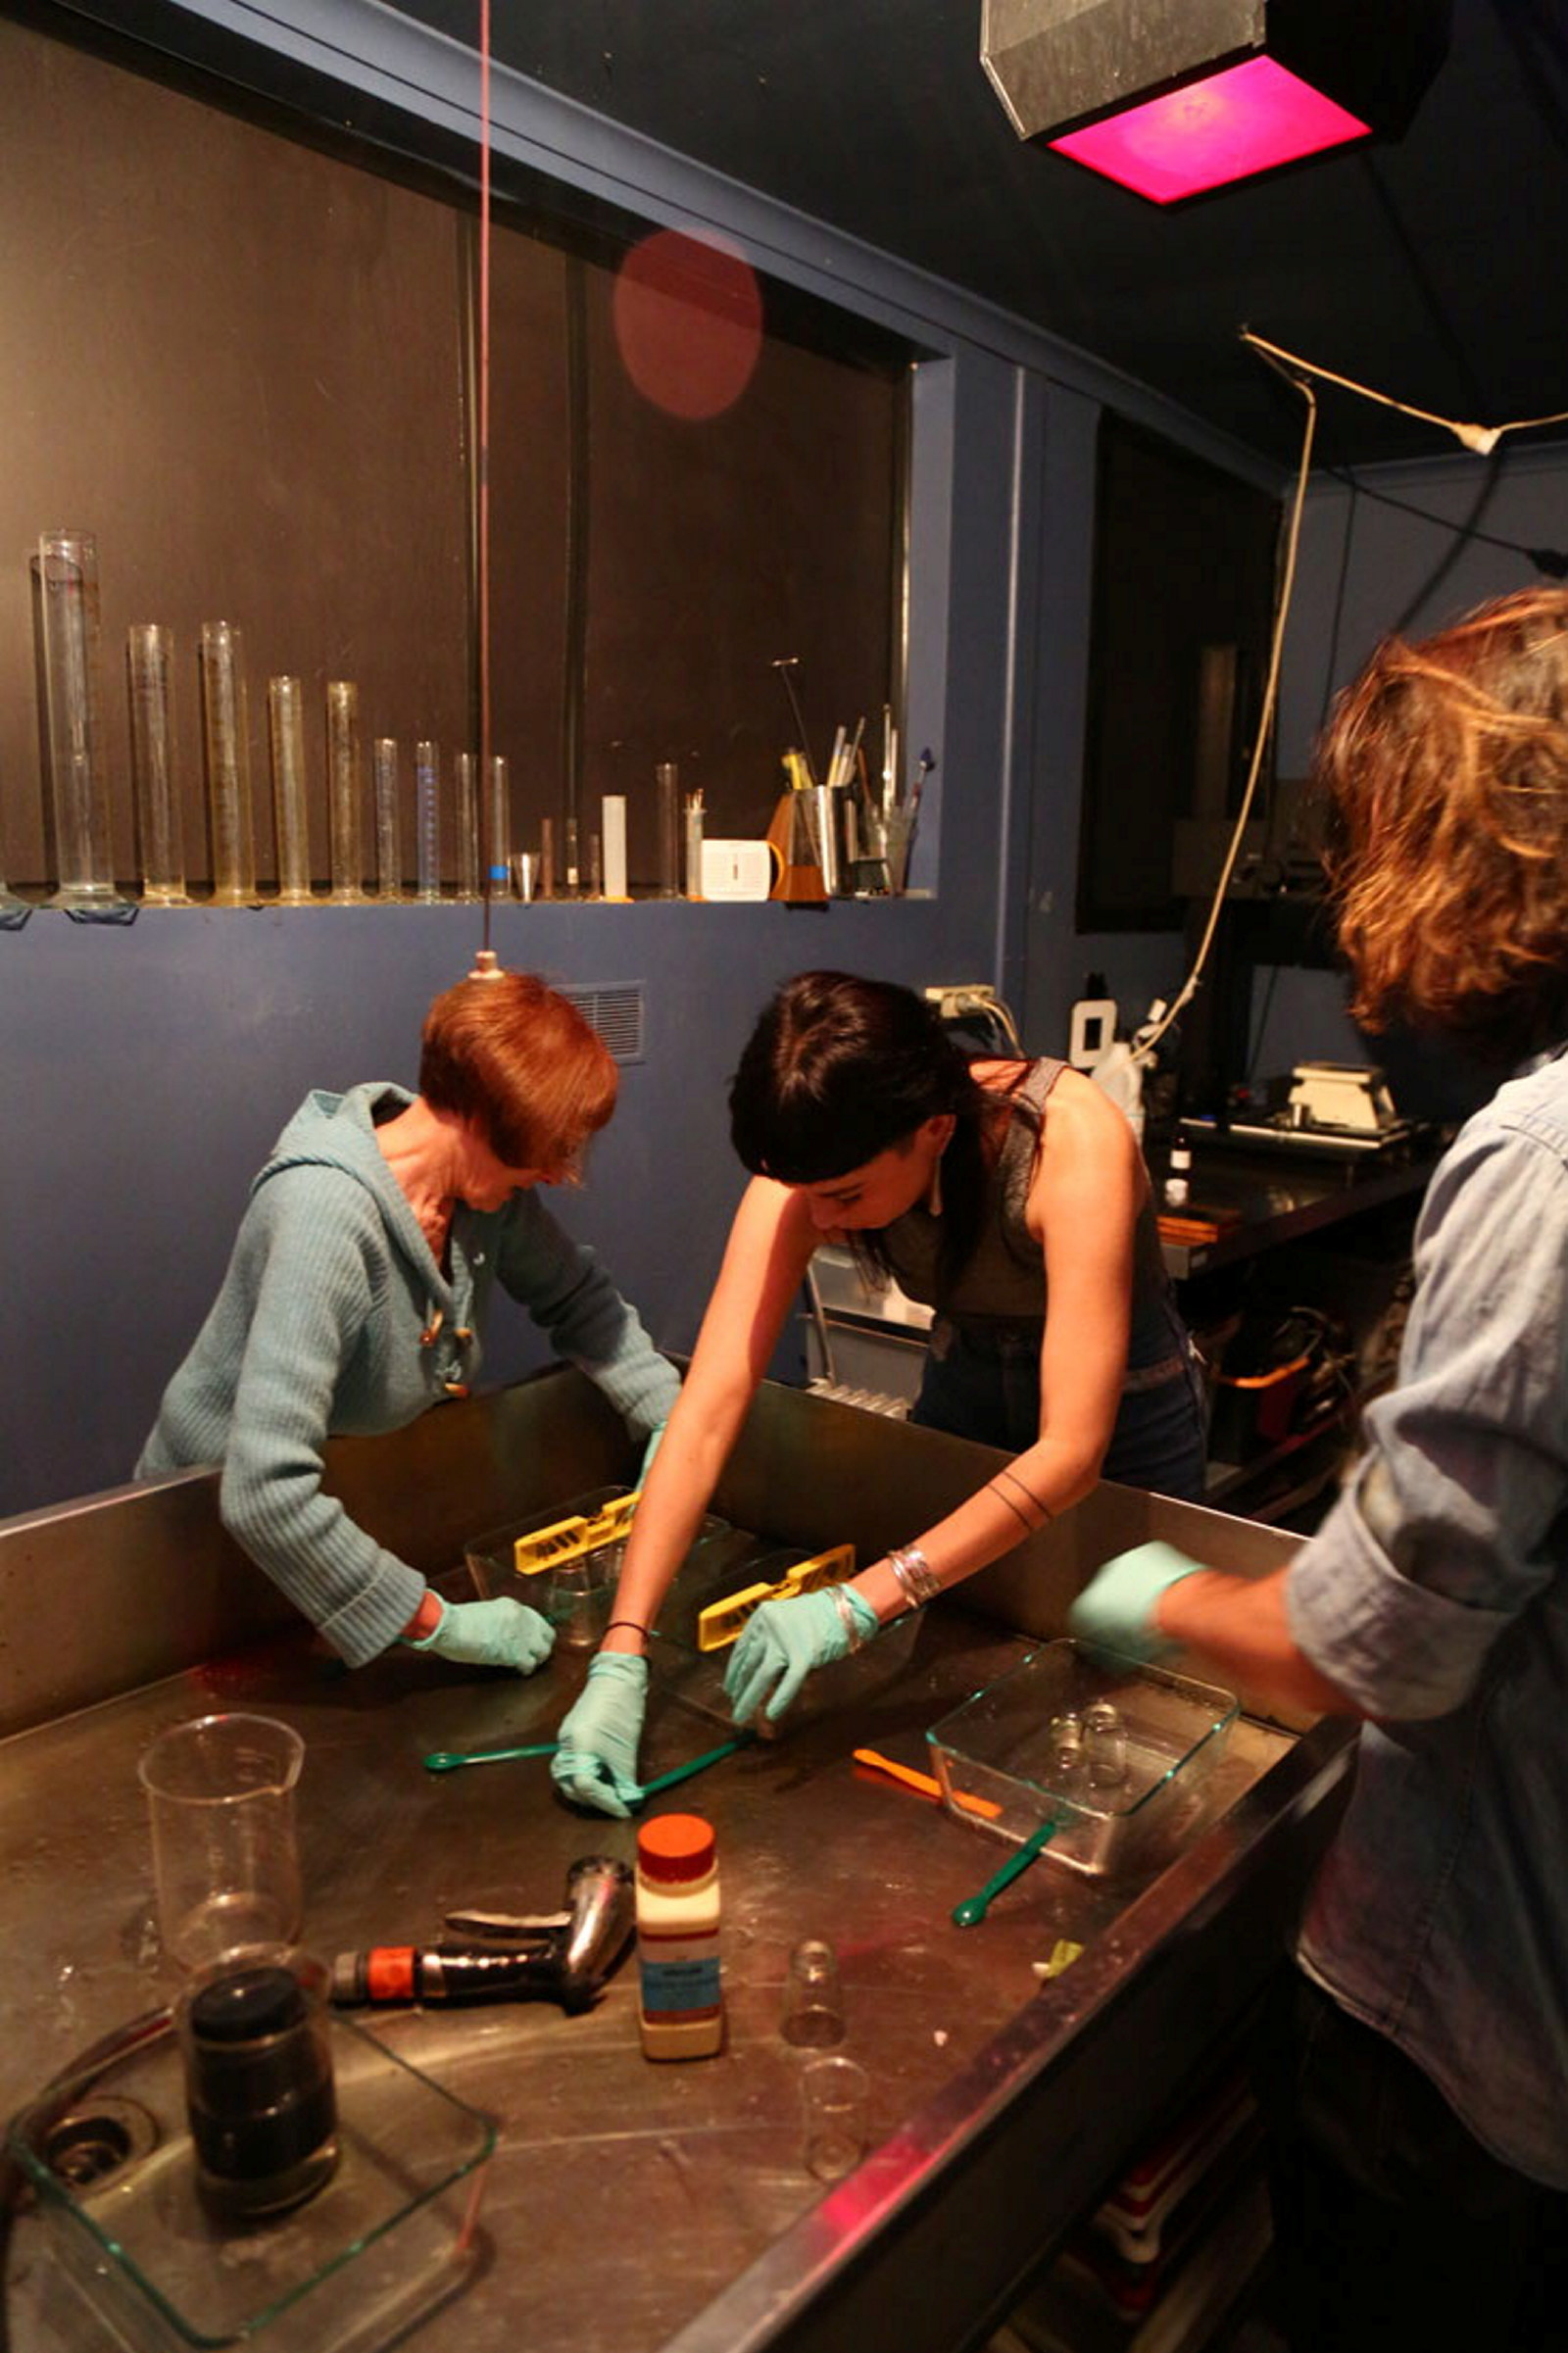 Group of people working with glass plates at wooden bench.